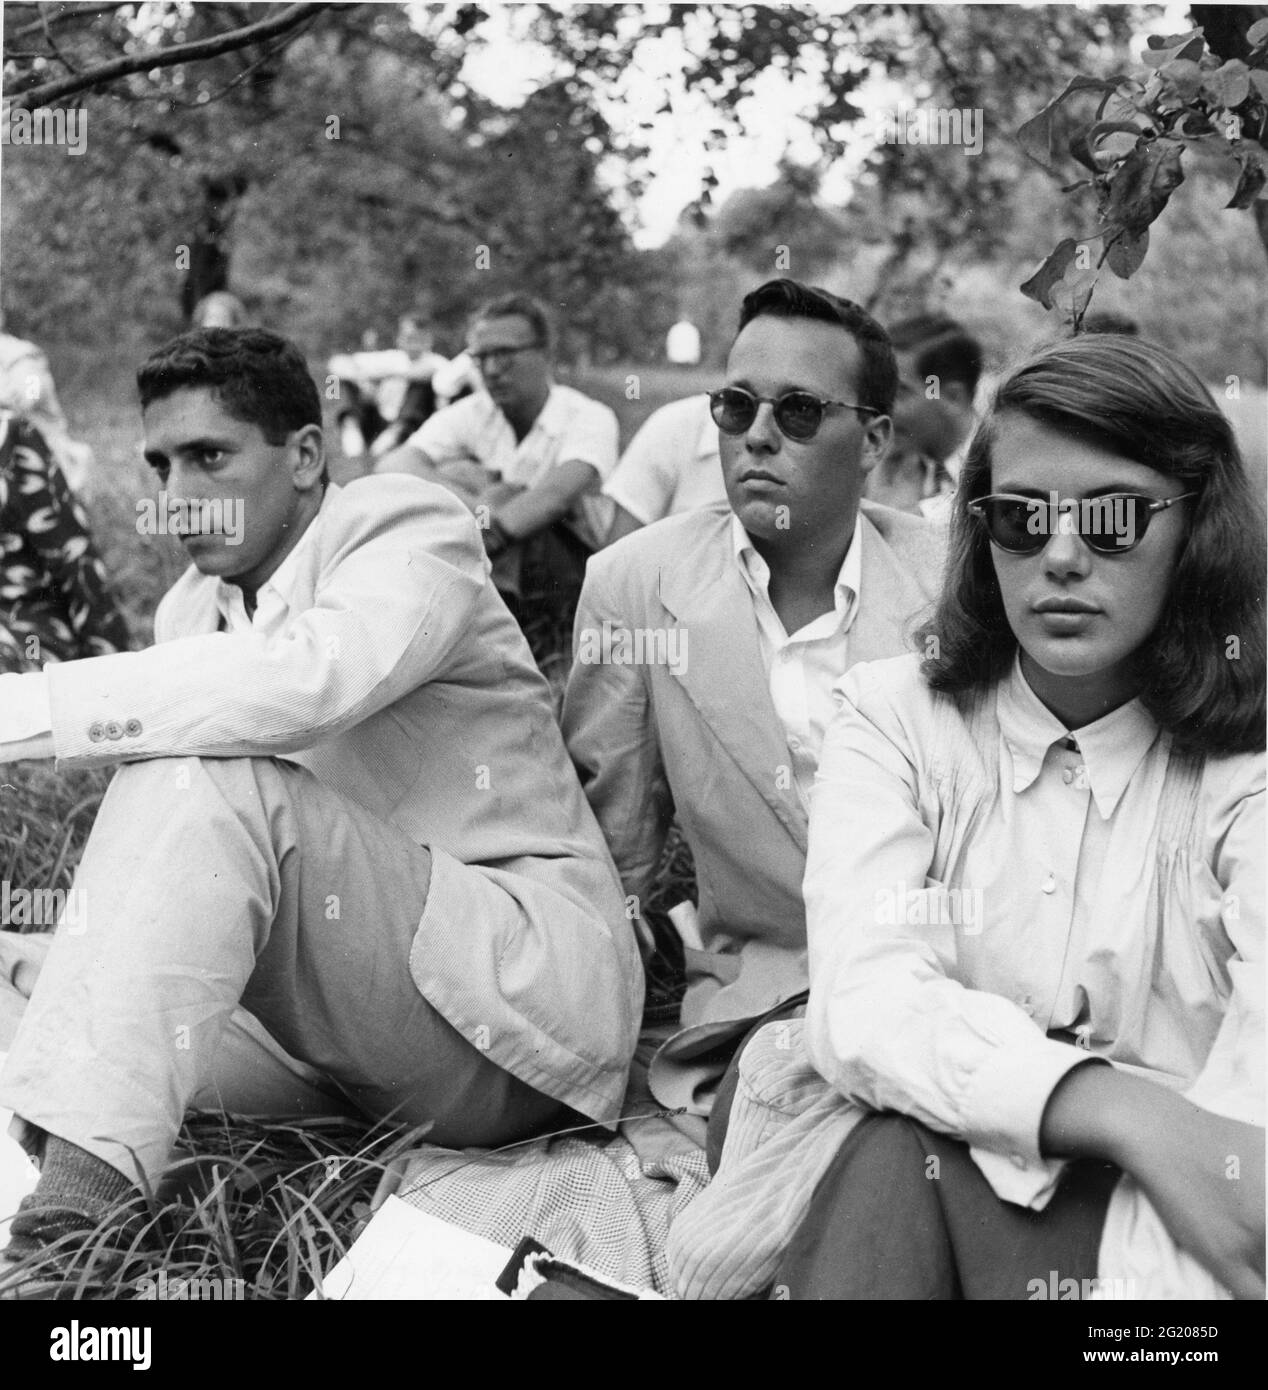 This attentive trio, seated on a grassy lawn, is listening to an outdoor choral concert at the Berkshire Music Festival at Tanglewood, Lenox, MA, August, 1949. (Photo by Speiser/US Department of State/RBM Vintage Images) Stock Photo